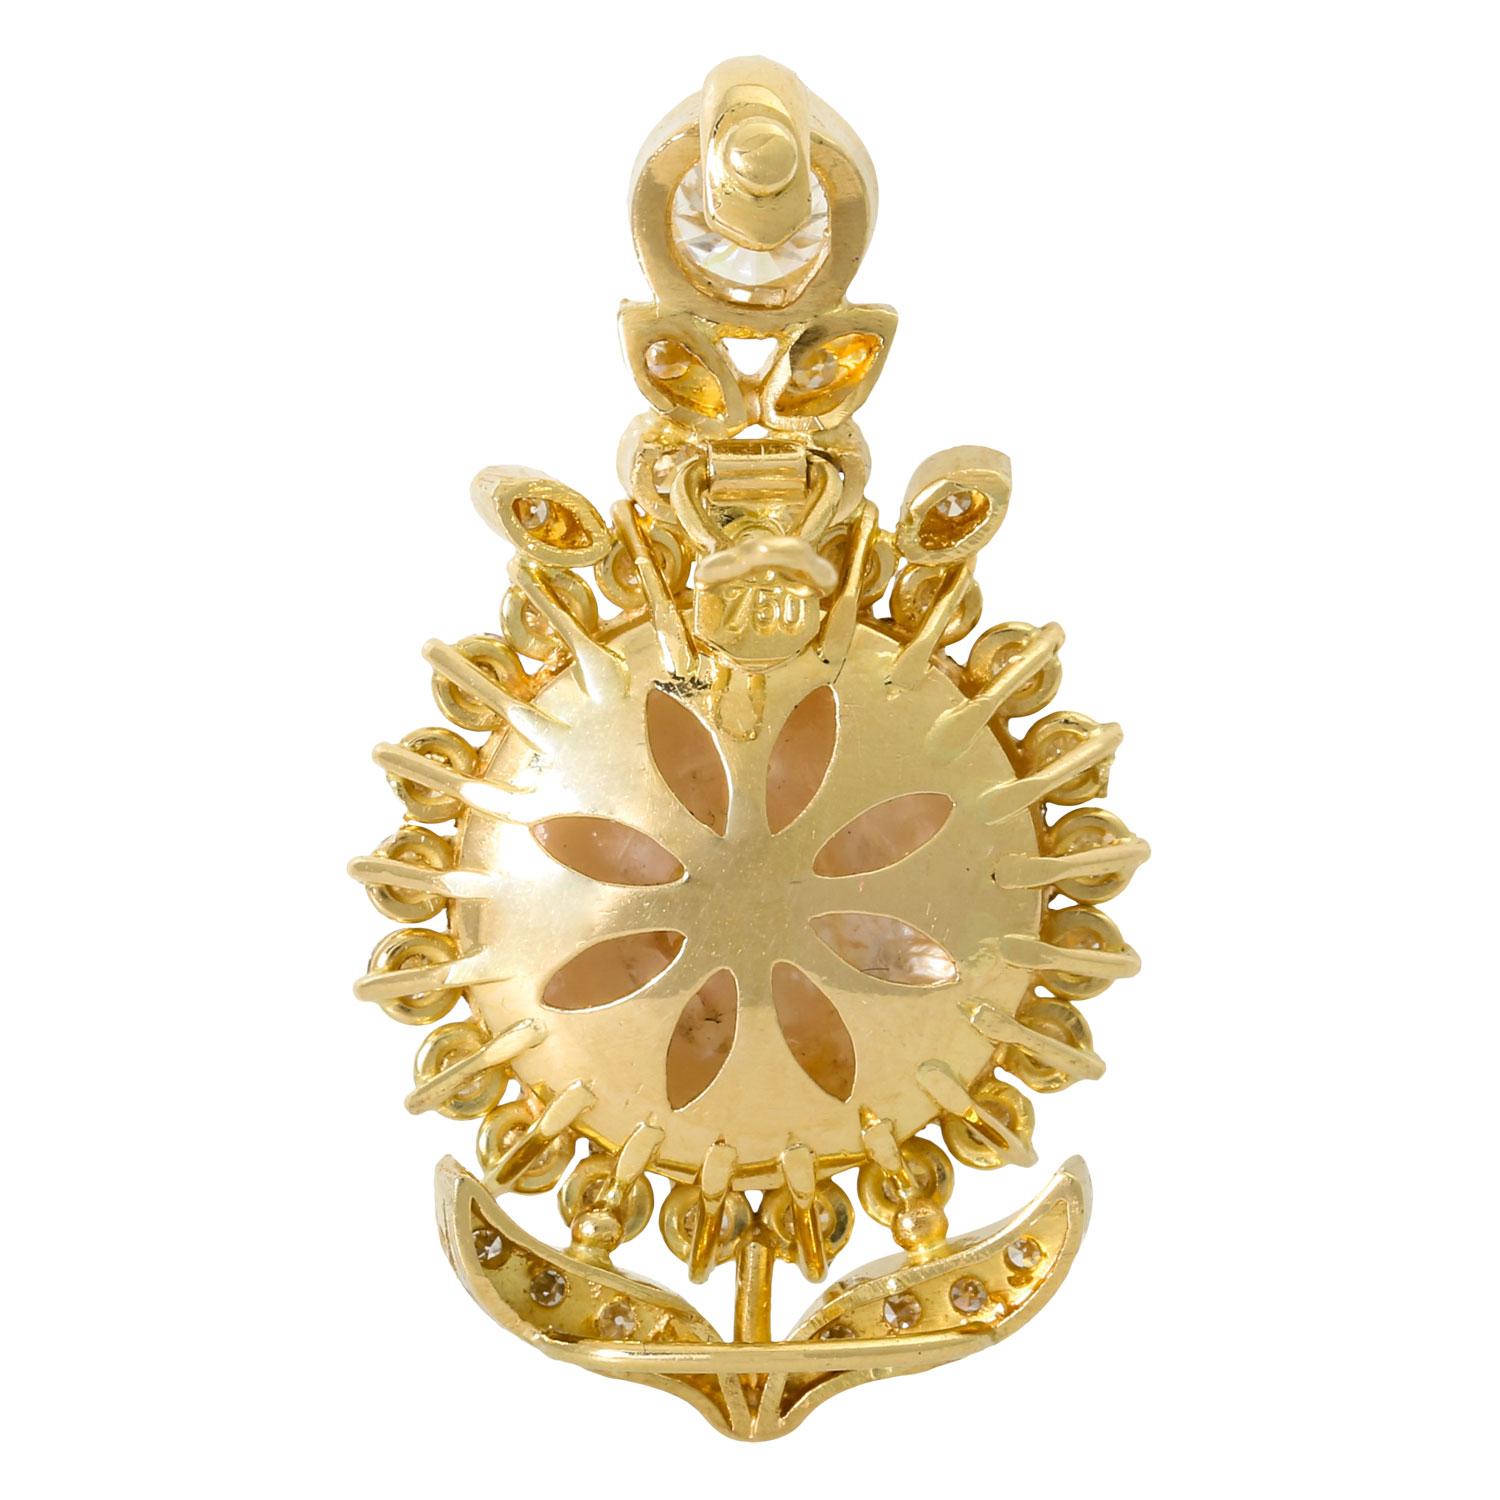 1 brilliant approx. 0.33 ct, otherwise further brilliants and octagonal diamonds, all approx. WHITE (H)/SI-VS, Mabe cultured pearl 13 mm, floral arrangement, GG 18K, 6.4 g, 3.1x1.8 cm, 20./21. Century, good condition.

 Clip-pendant with mabe